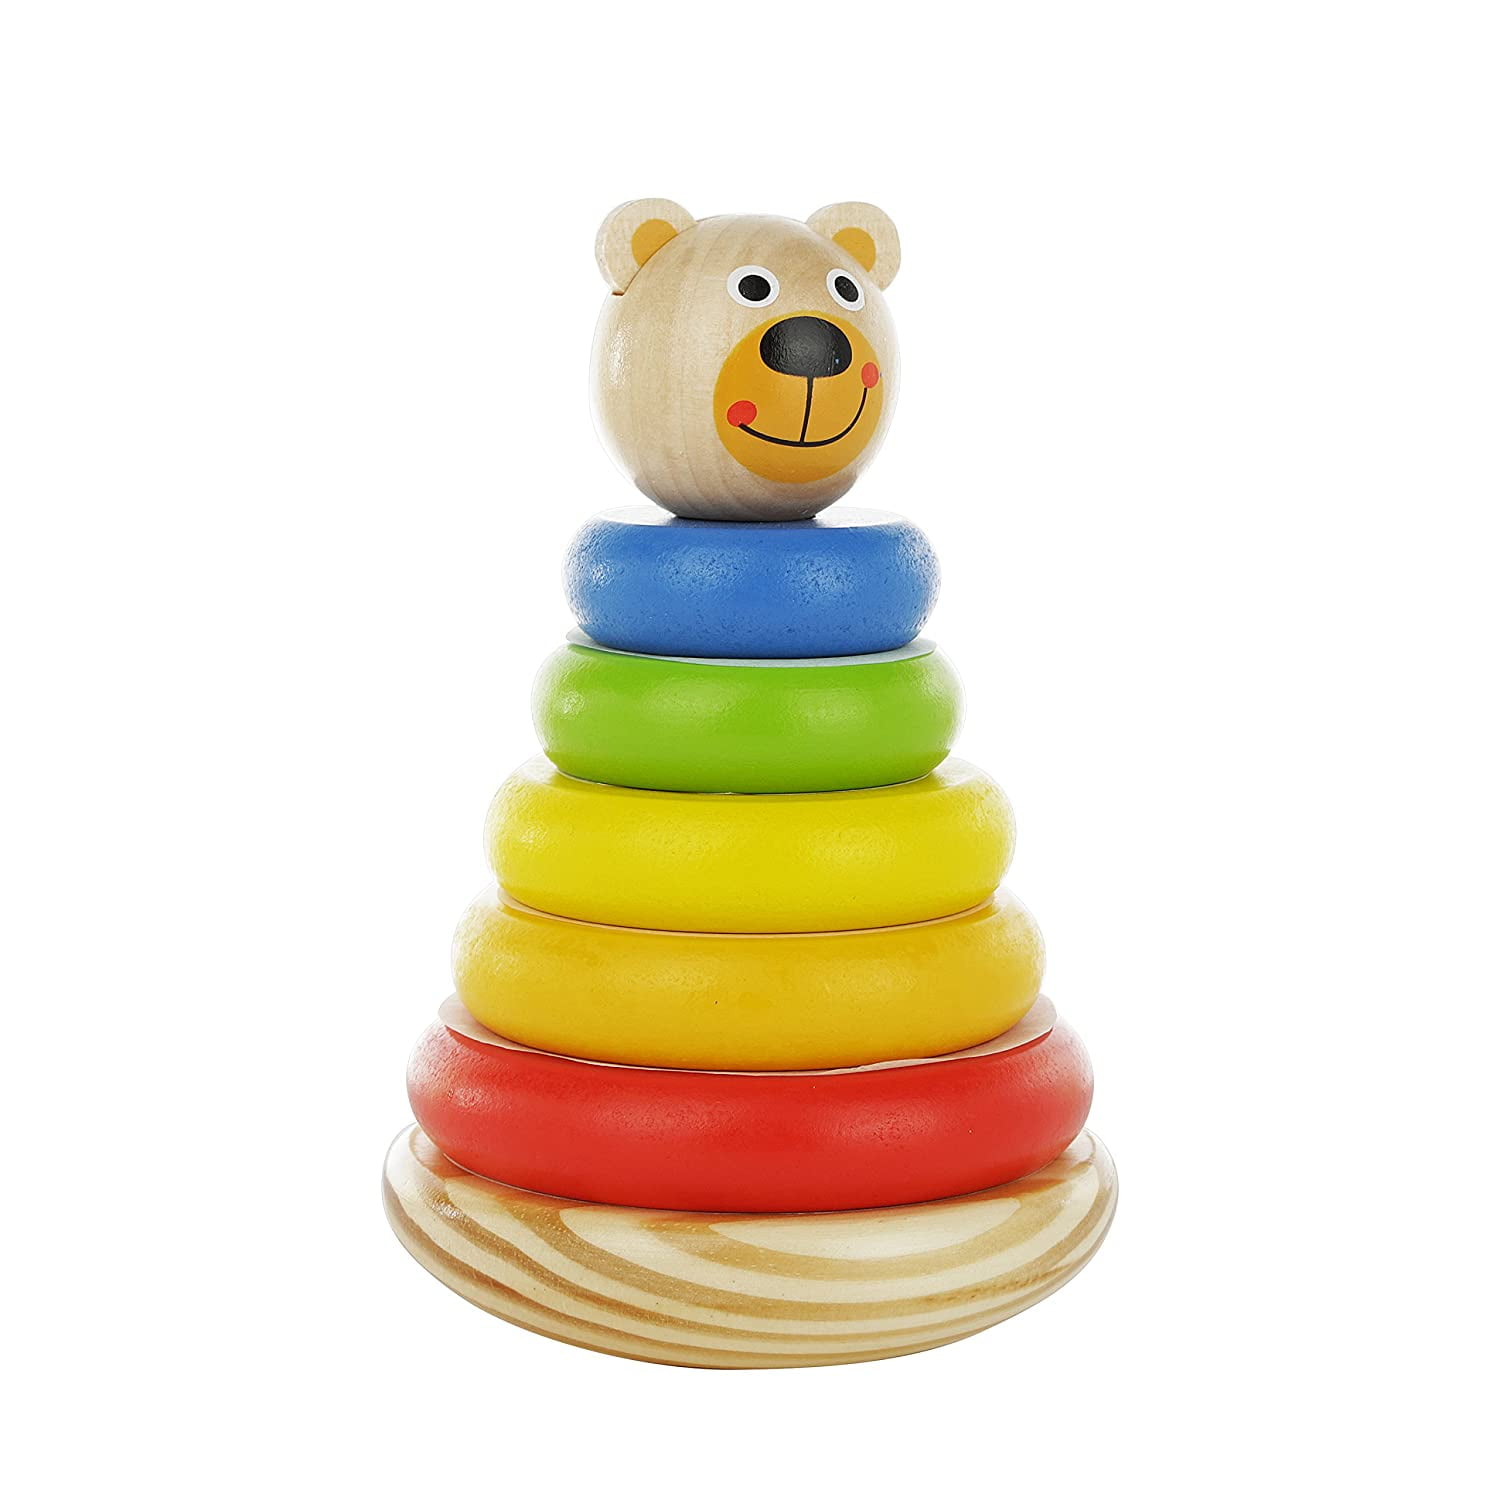 Details about   Rainbow Building Blocks Stacker DIY Wooden Stacking Game Kid Montessori Toy 